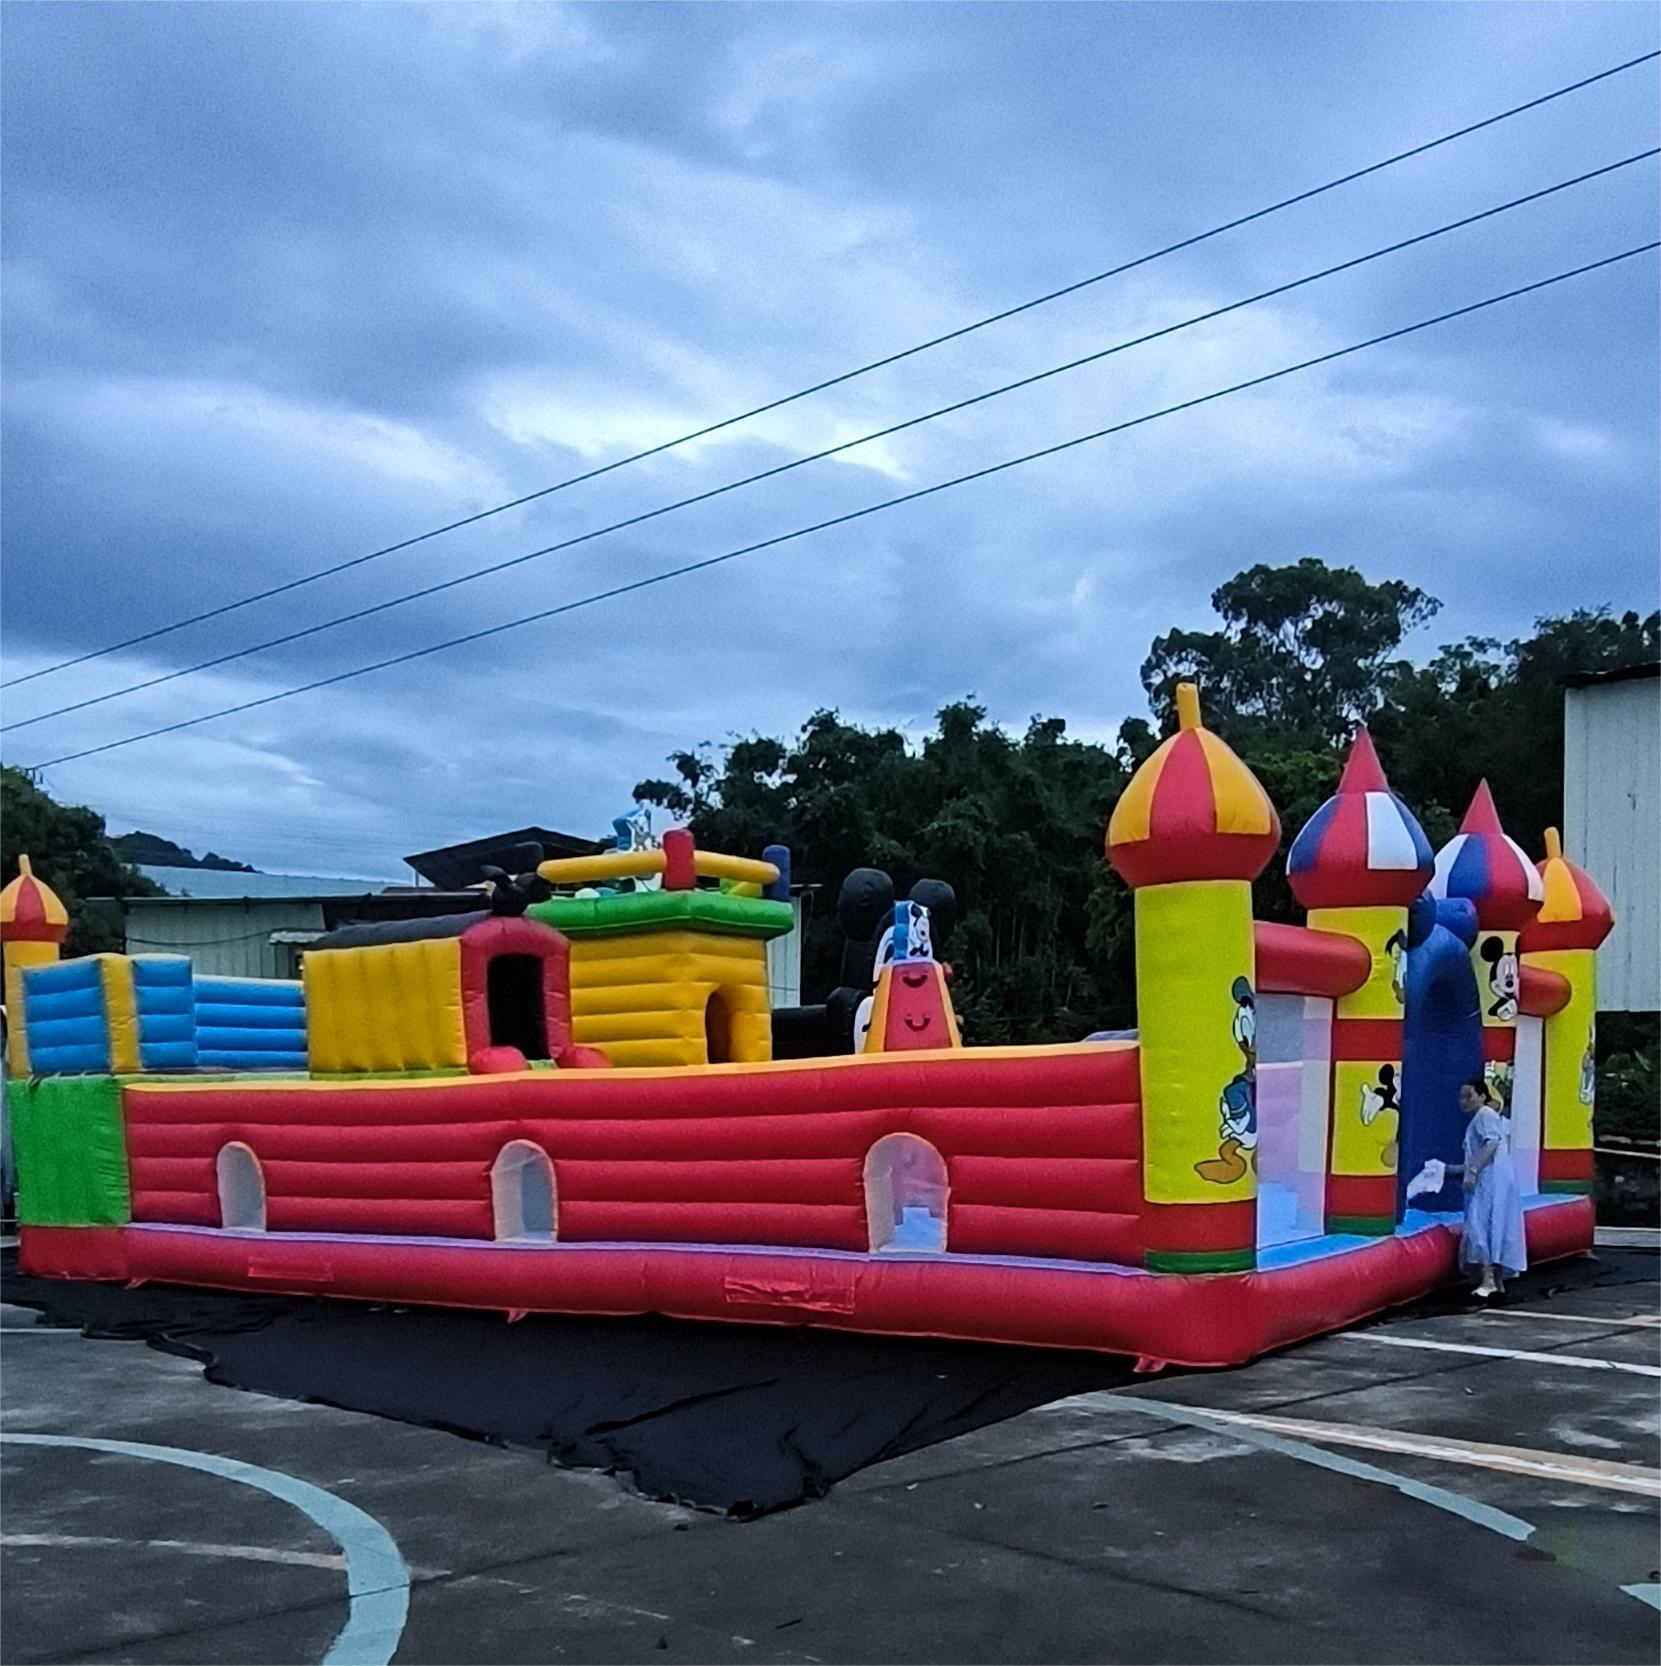 inflatable trampoline park Large amusement equipment games inflatable trampoline park bouncy castle inflatable outdoors theme park in playground square stall inflatable trampoline park,theme park